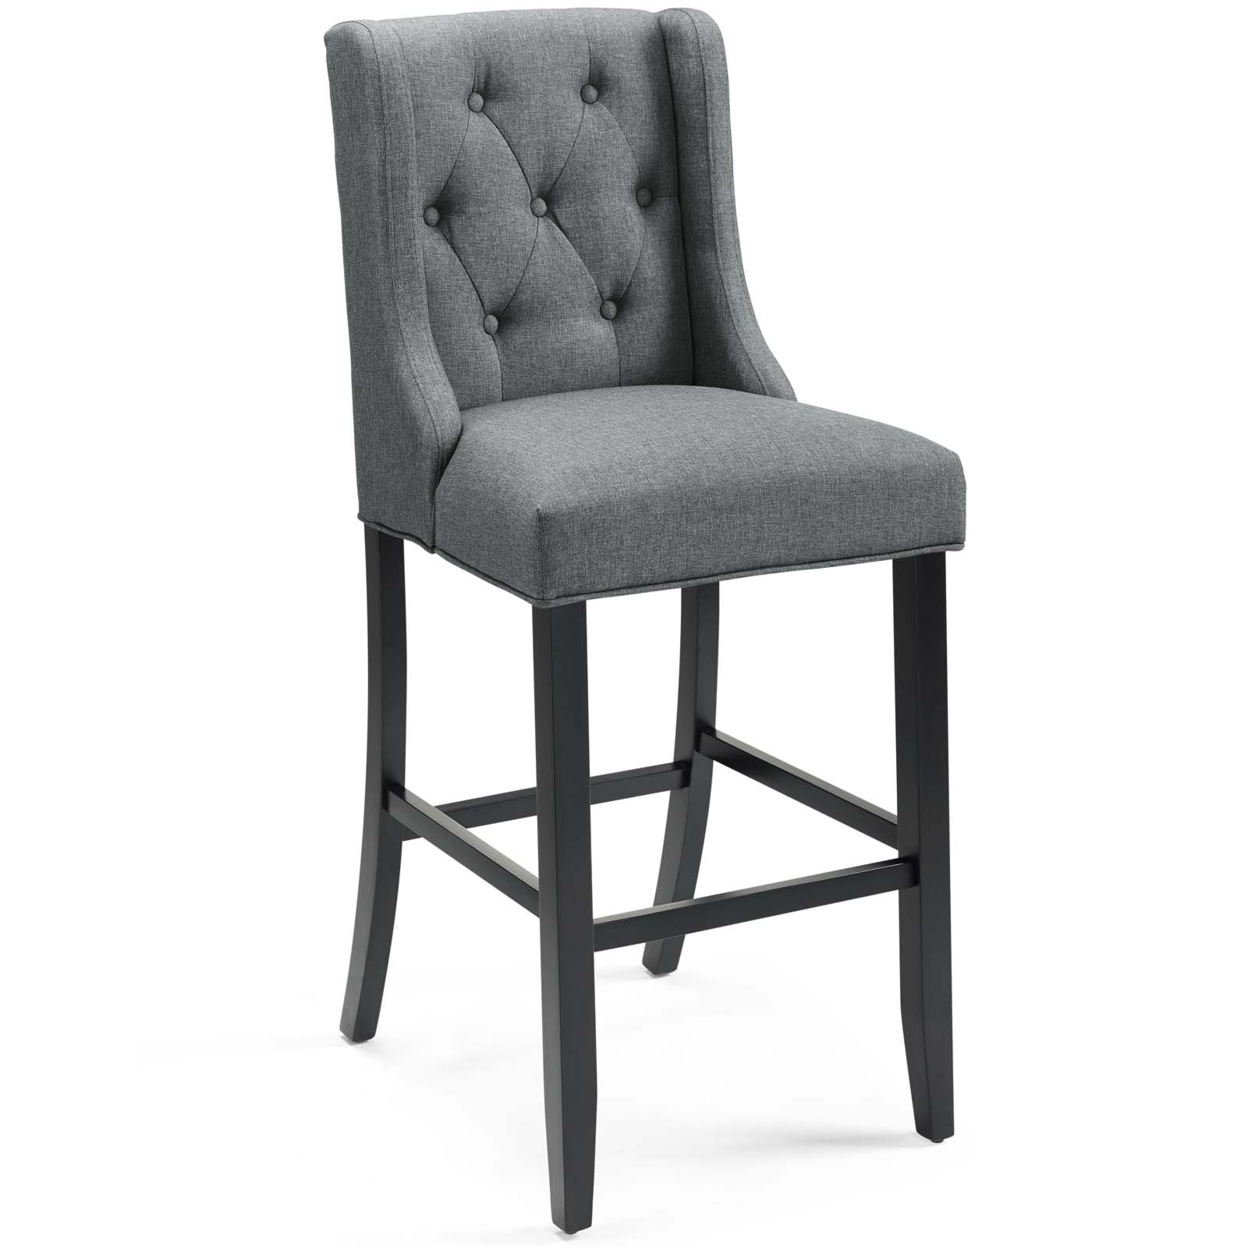 46 Inch Bar Stool, Button Tufted, Gray Fabric, Black, Modway